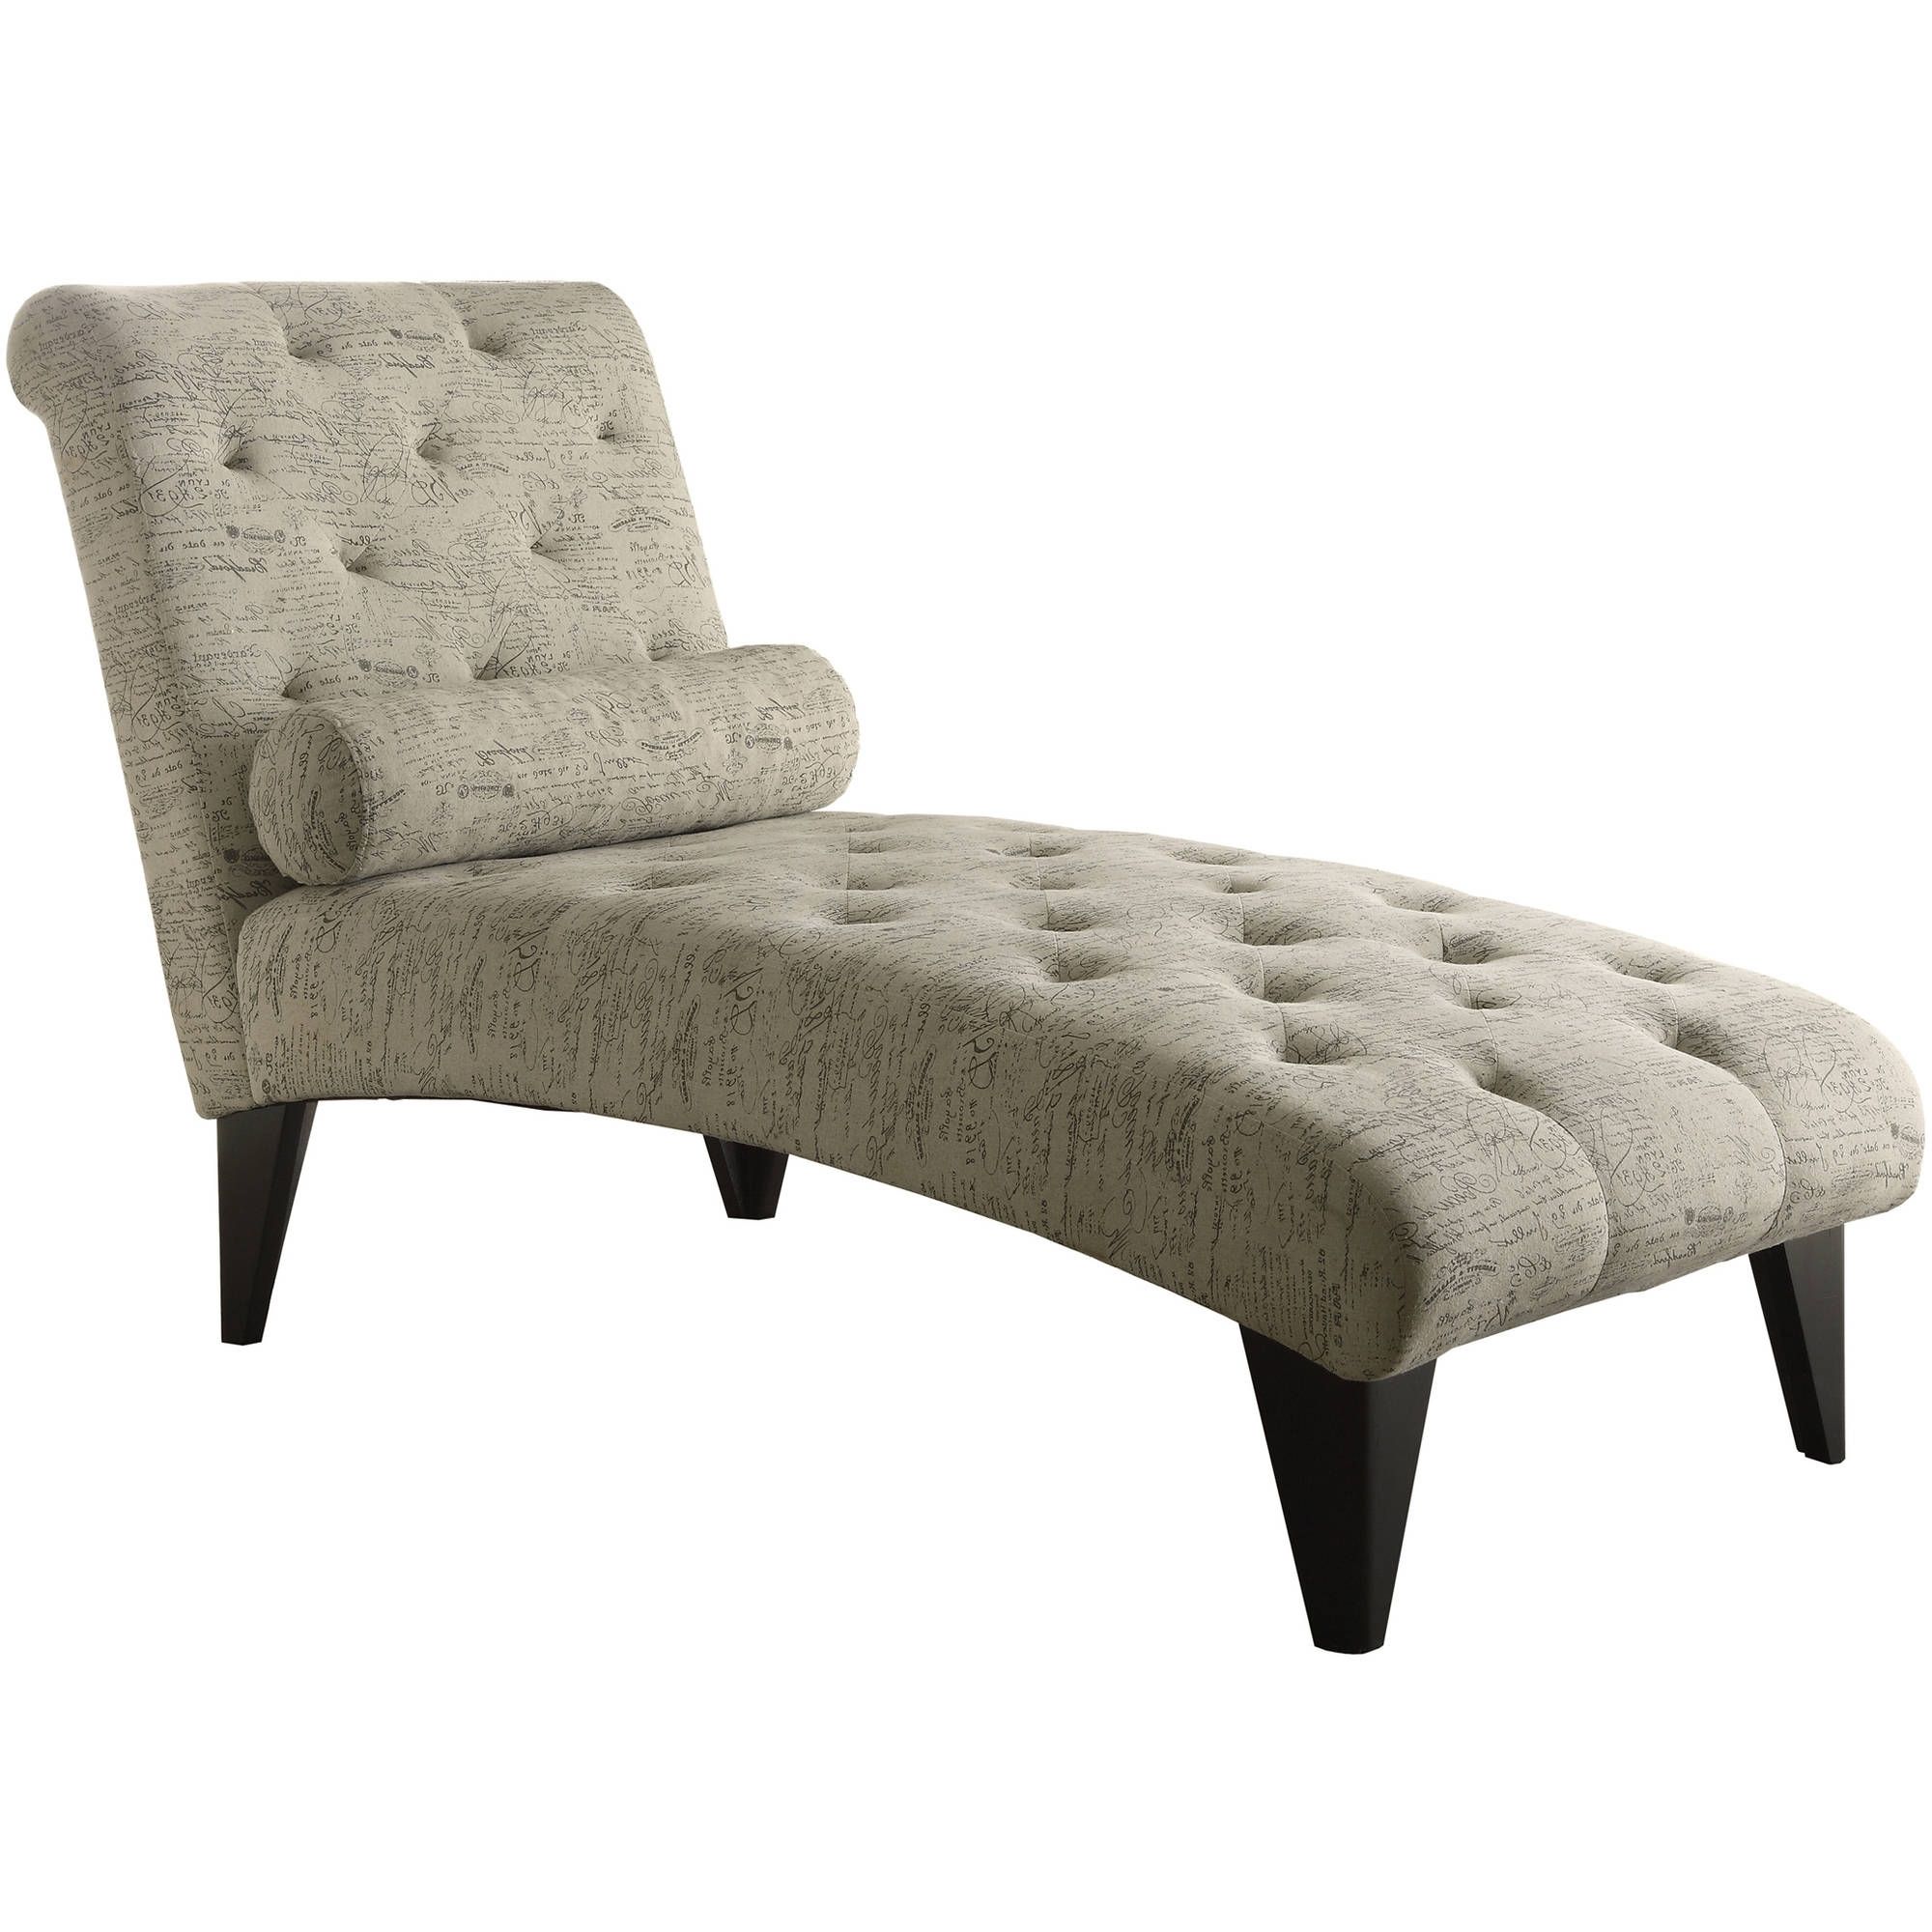 Famous Armless Chaise Lounges With Chaise Lounges – Walmart (View 8 of 15)